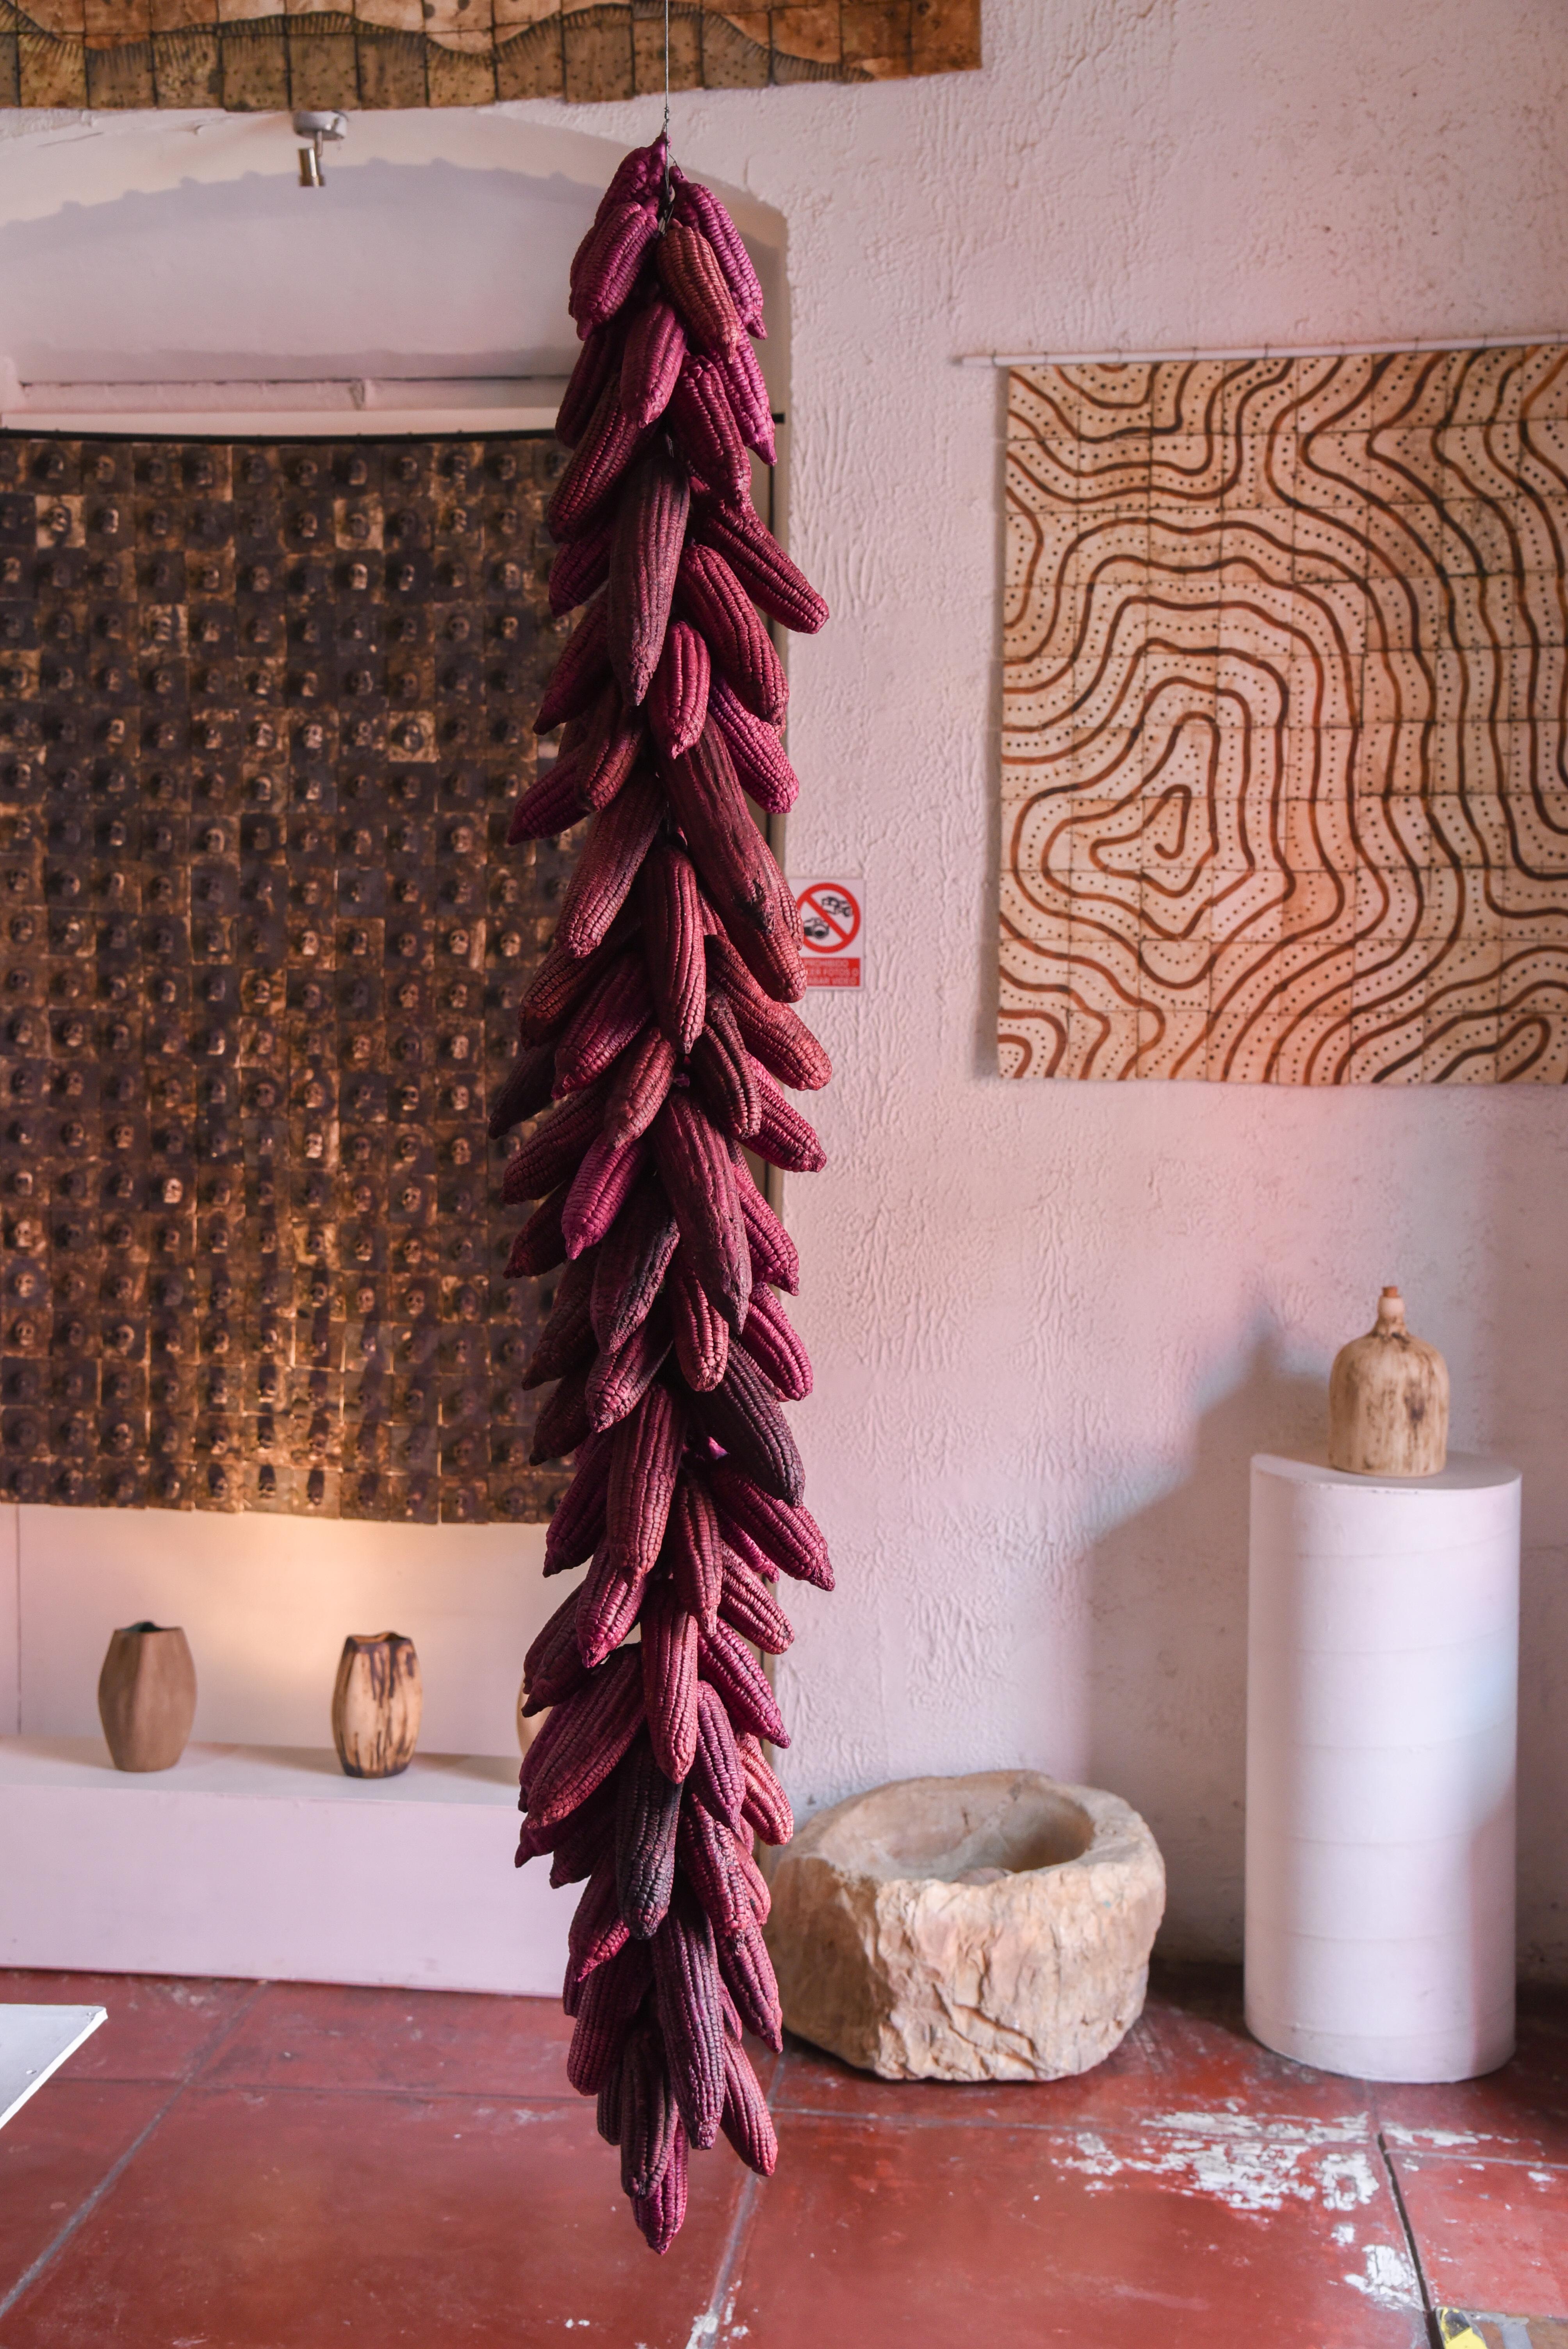 This astonishing 160 cm tall corn assemblage is made up of authentic ceramic corn cob reproductions. These are dyed using grana cochineal ( a scale insect from which the natural dye carmine is derived -- usually growing on cactus plant). The corn